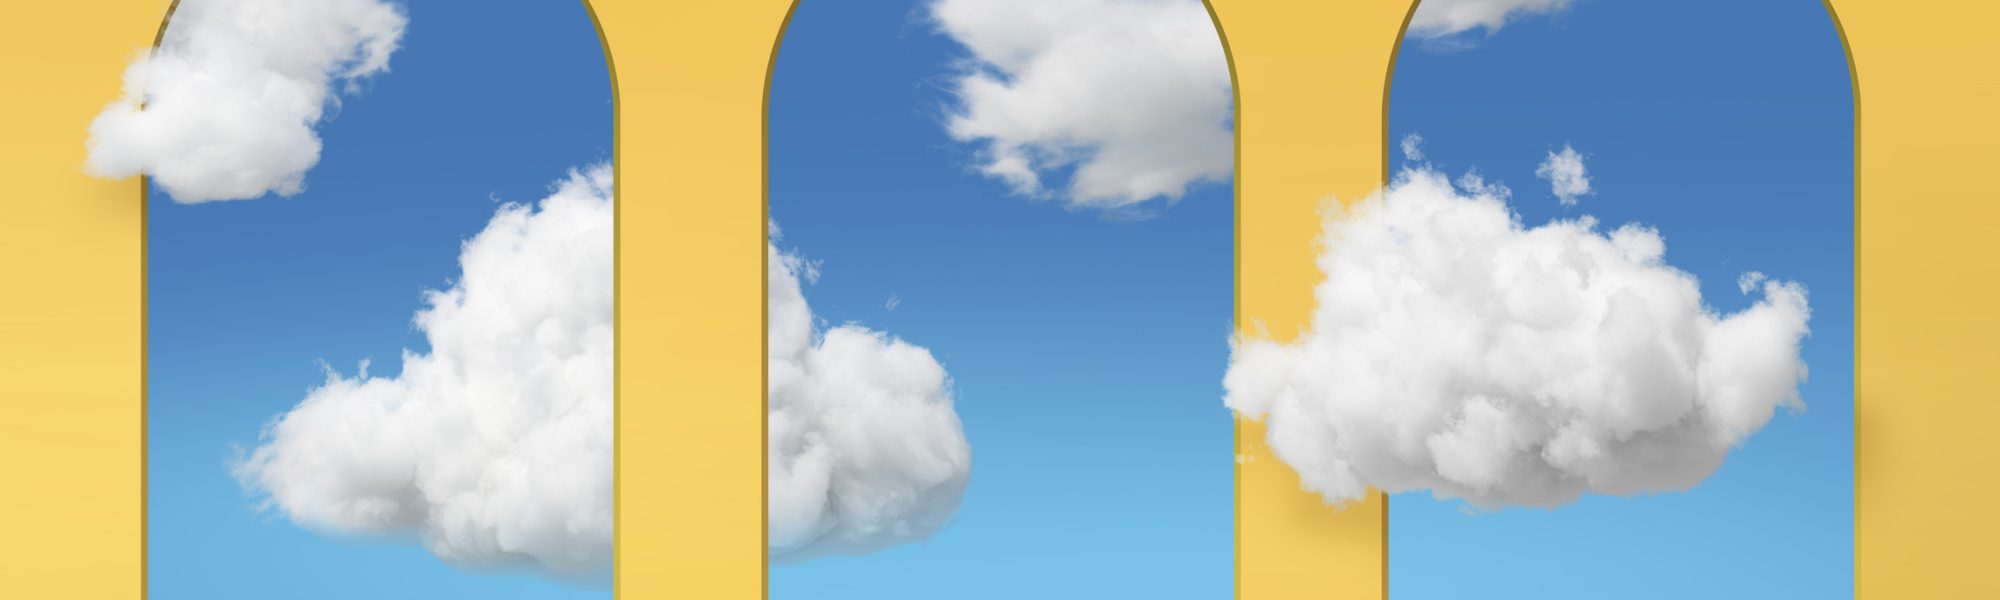 3d rendering, abstract background with blue sky inside the arch windows on the yellow wall. White clouds fly inside the room.